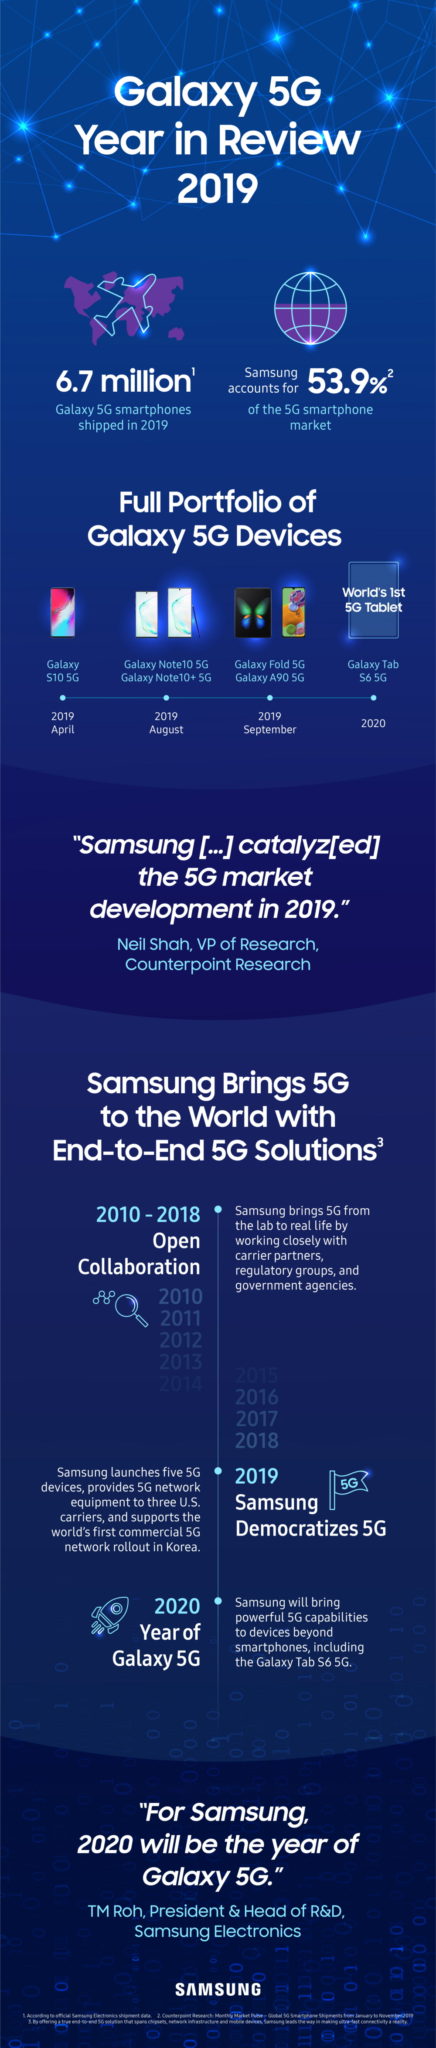 Samsung Brings 5G to World by Shipping More than 6.7 Million Galaxy 5G Devices in 2019